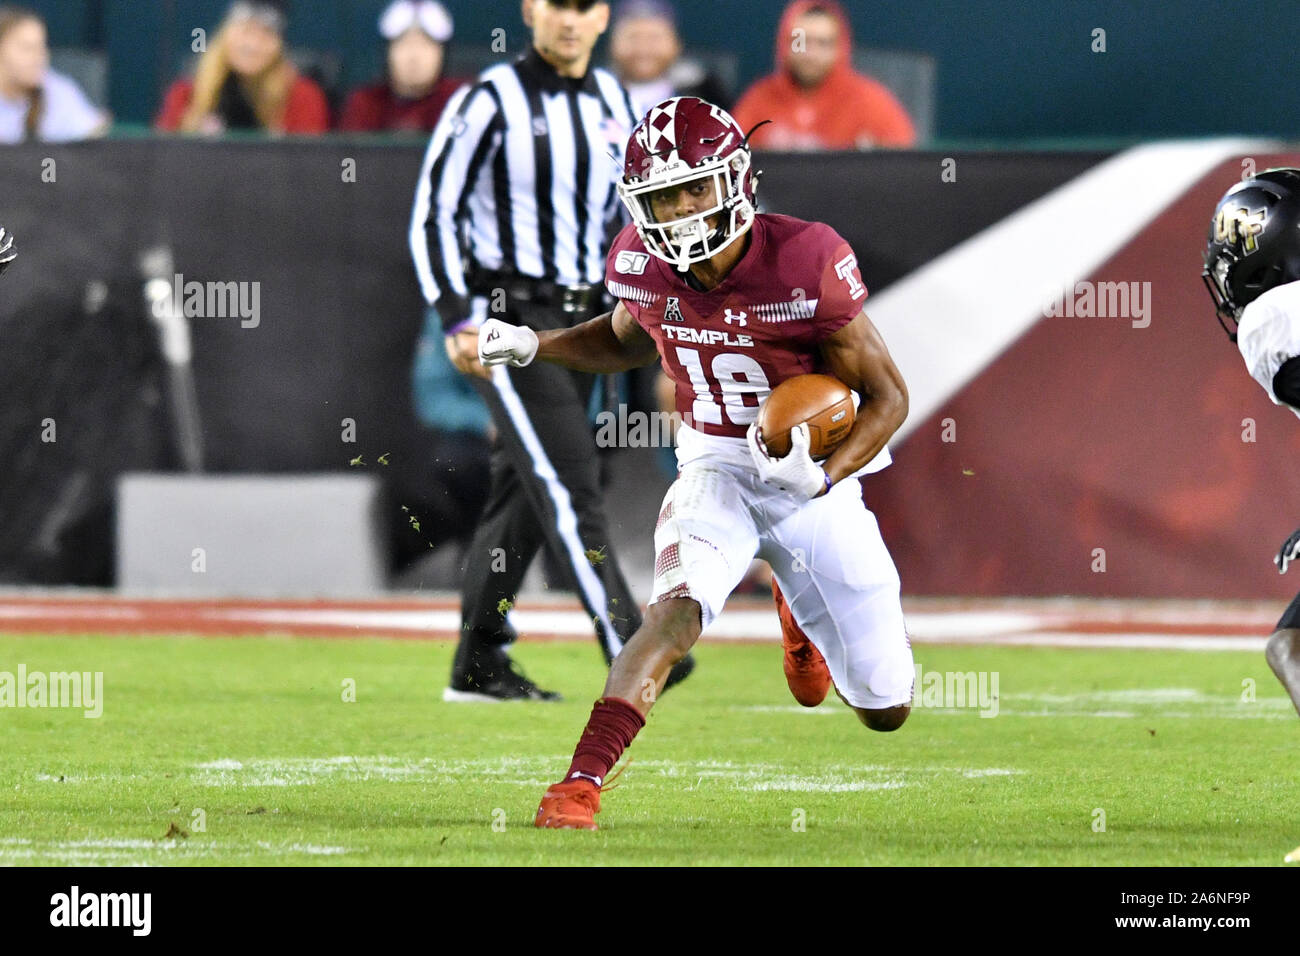 Philadelphia, Pennsylvania, USA. 26th Oct, 2019. Temple Owls wide receiver JADAN BLUE (18) cuts back with the ball during the football game played at Lincoln Financial Field in Philadelphia. UCF beat Temple 63-21. Credit: Ken Inness/ZUMA Wire/Alamy Live News Stock Photo